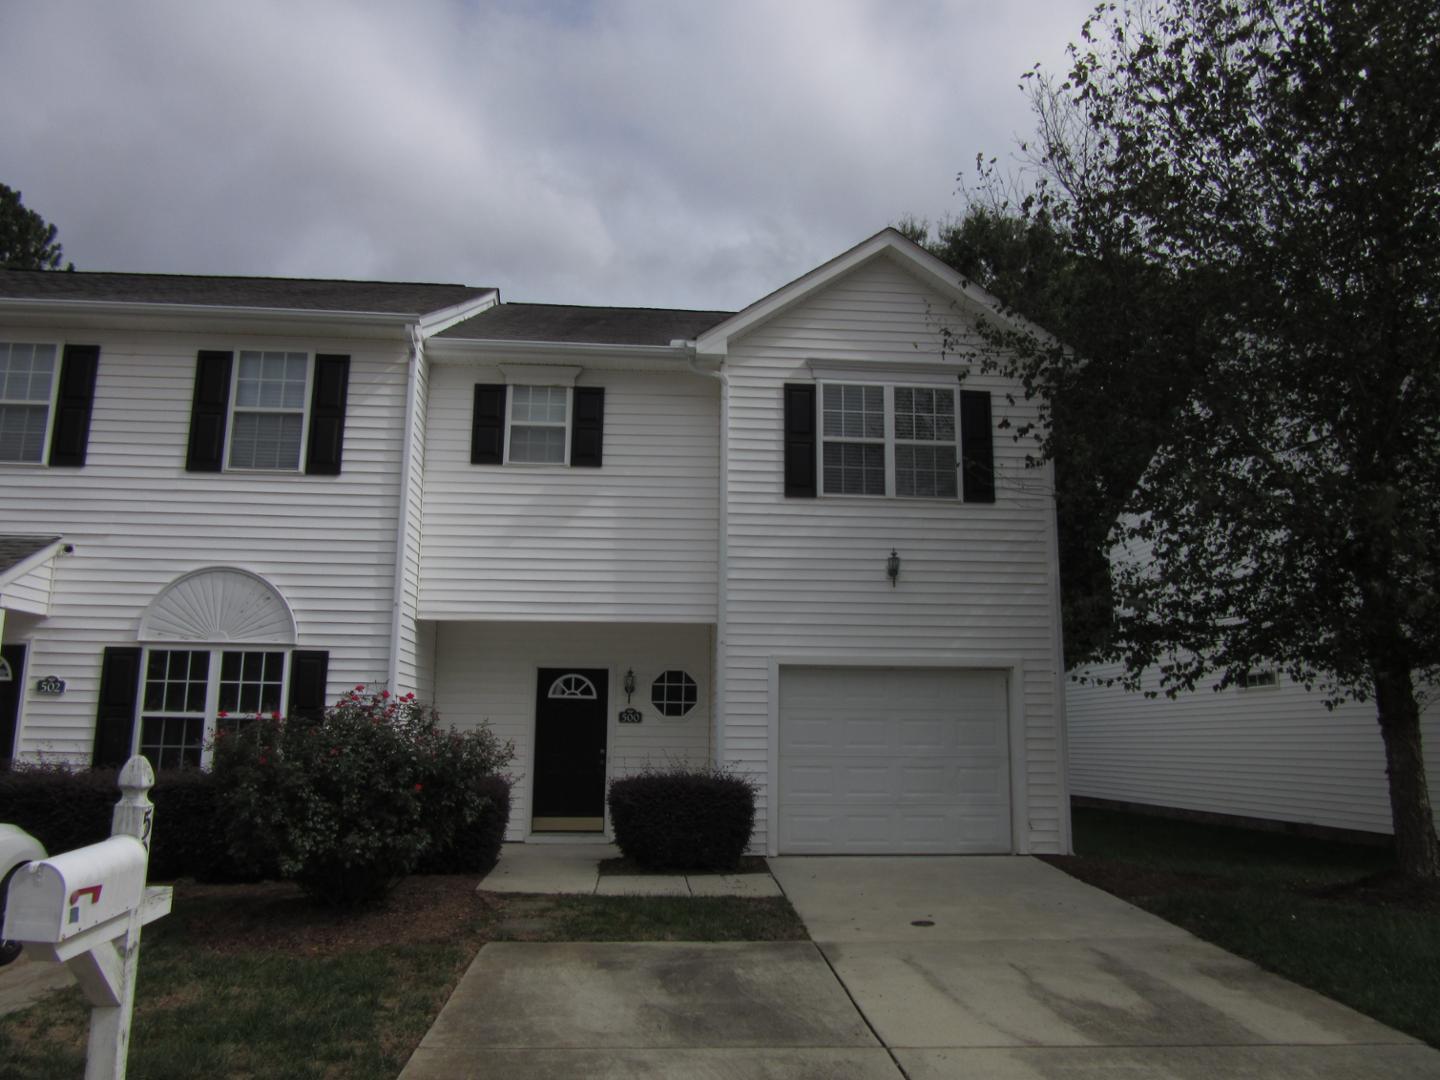 View Morrisville, NC 27560 townhome